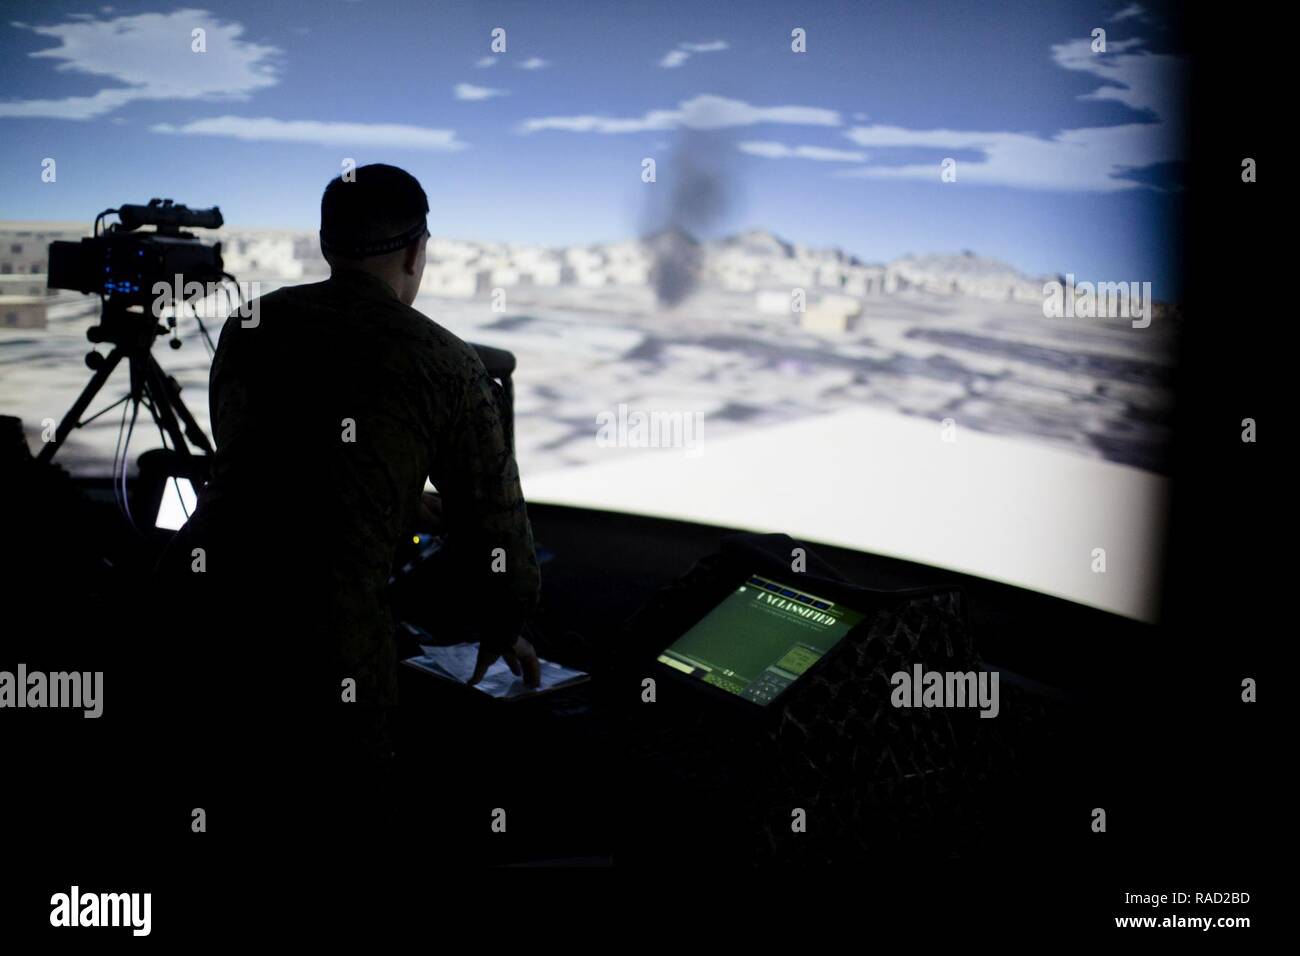 A U.S. Marine with 2nd Marine Division utilizes a Supporting Arms Virtual Trainer during a visit from Gen. Glenn Walters, Assistant Commandant of the Marine Corps, Camp Lejeune, N.C., Jan. 26, 2017. The purpose of the visit was to increase awareness and capabilities of ground simulation and simulator training systems in support of operational forces combat readiness. Stock Photo